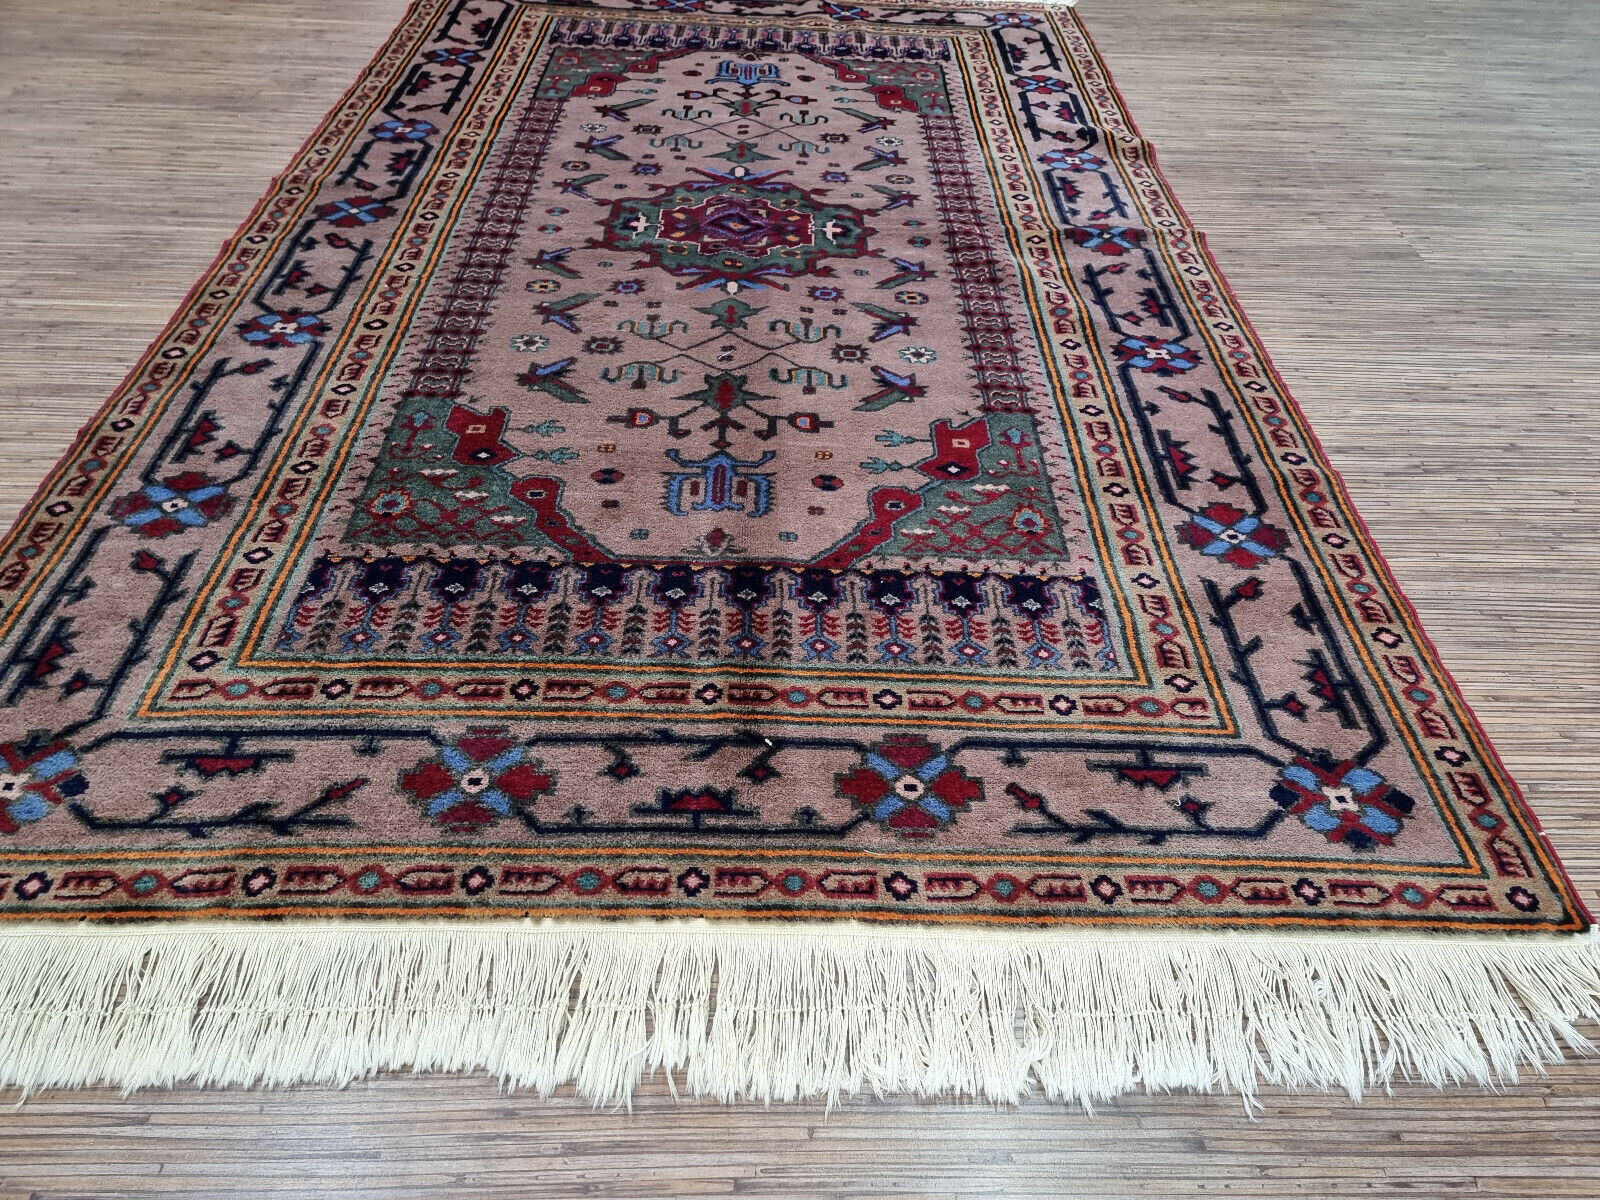 Close-up of sophistication on Handmade Vintage Caucasian Shirvan Rug - Detailed view showcasing the rug's sophistication and timeless elegance.